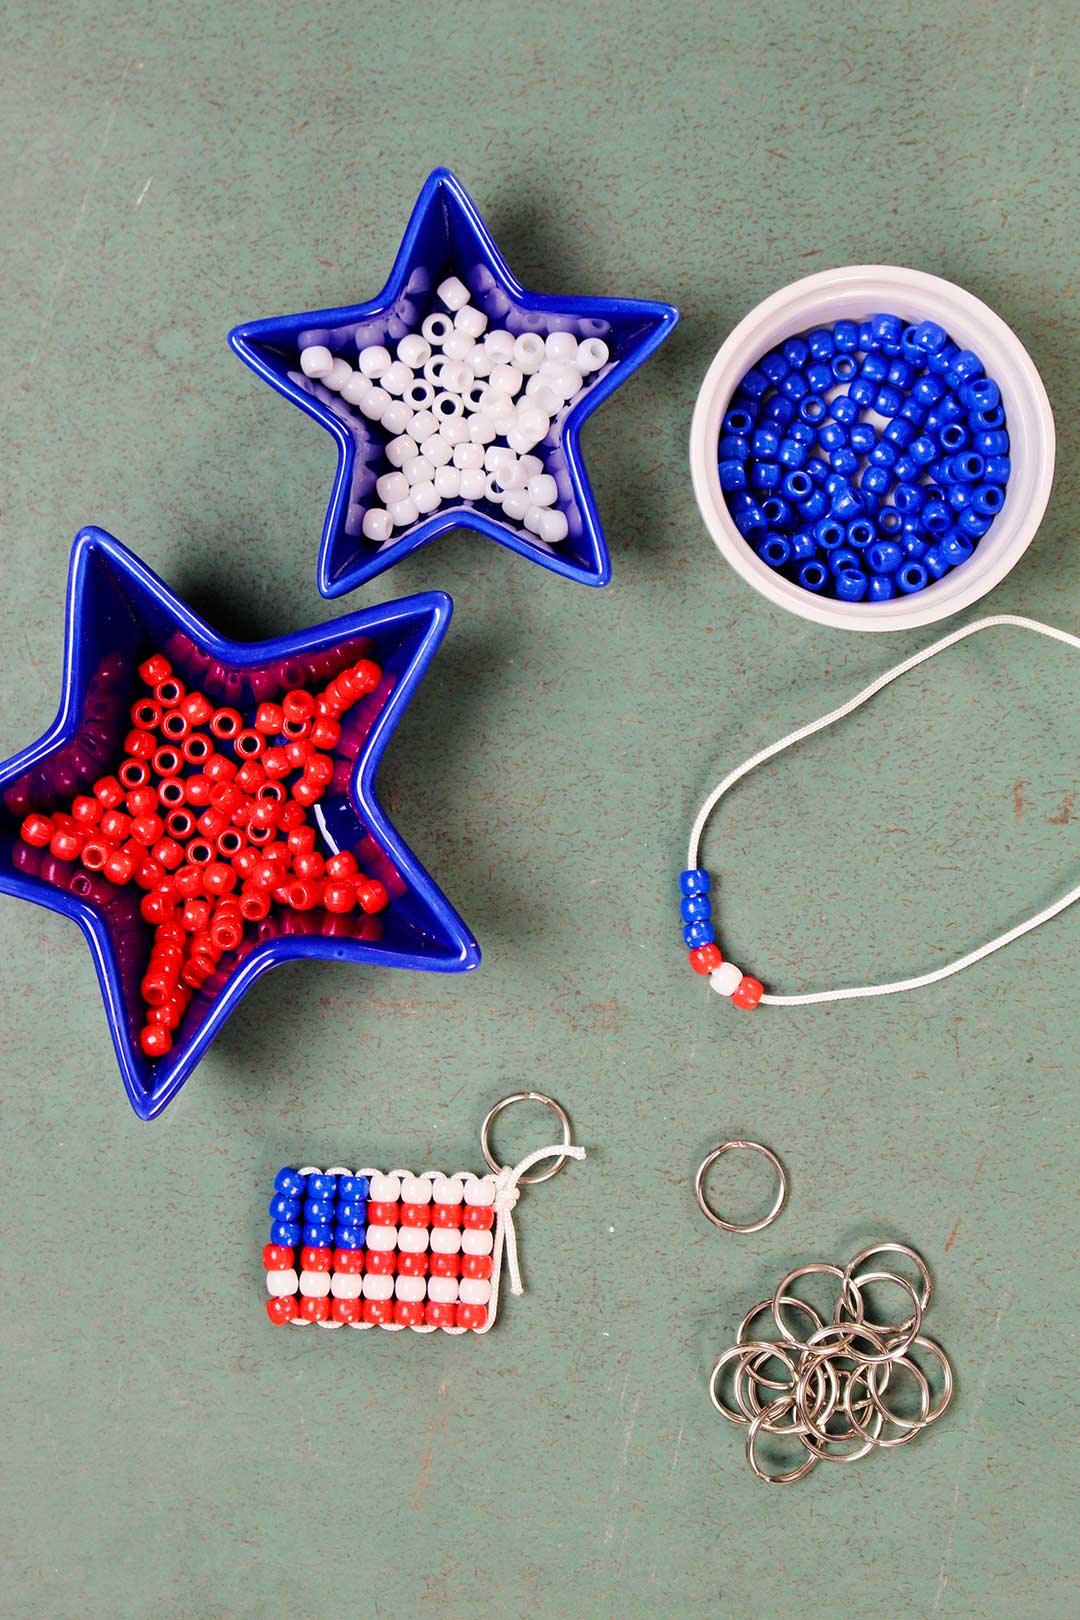 Three dishes of red, white and blue pony beads with a finished beaded flag keychain and key rings resting on a green counter. White string with beads showing step 1.